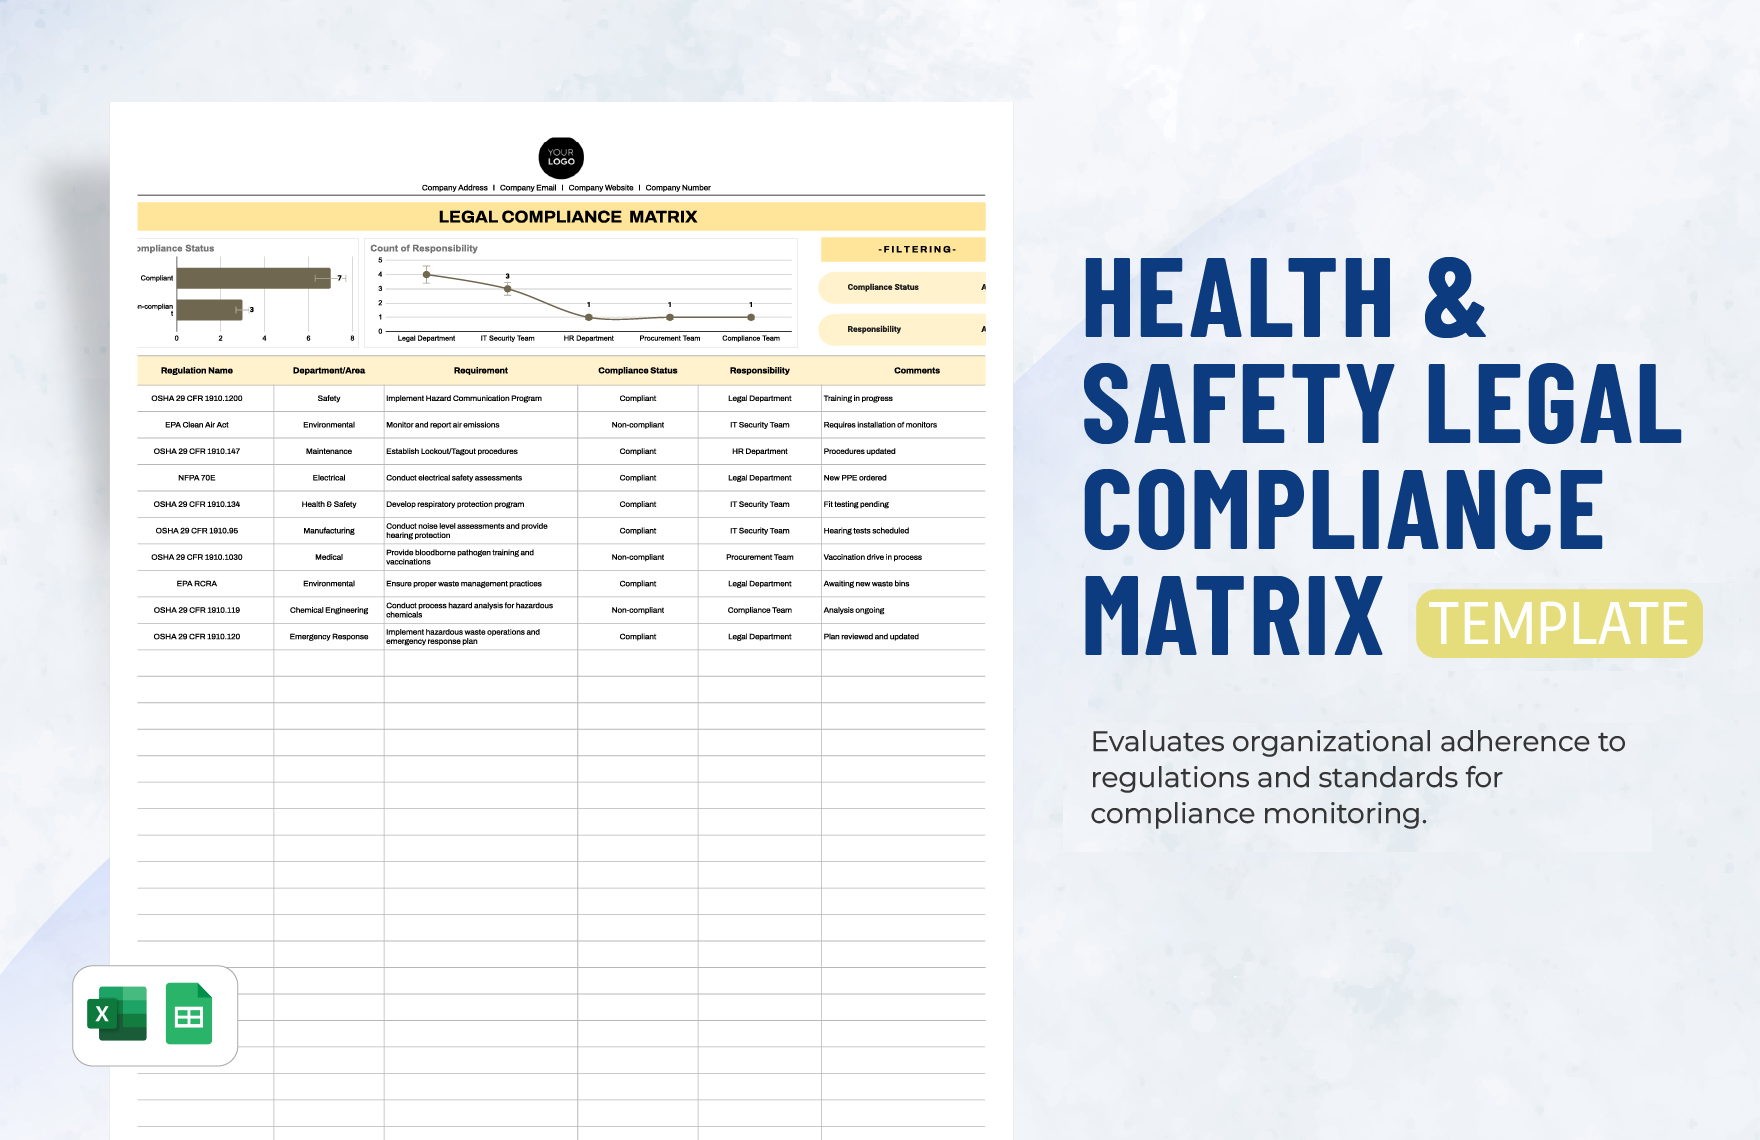 Health & Safety Legal Compliance Matrix Template in Excel, Google Sheets